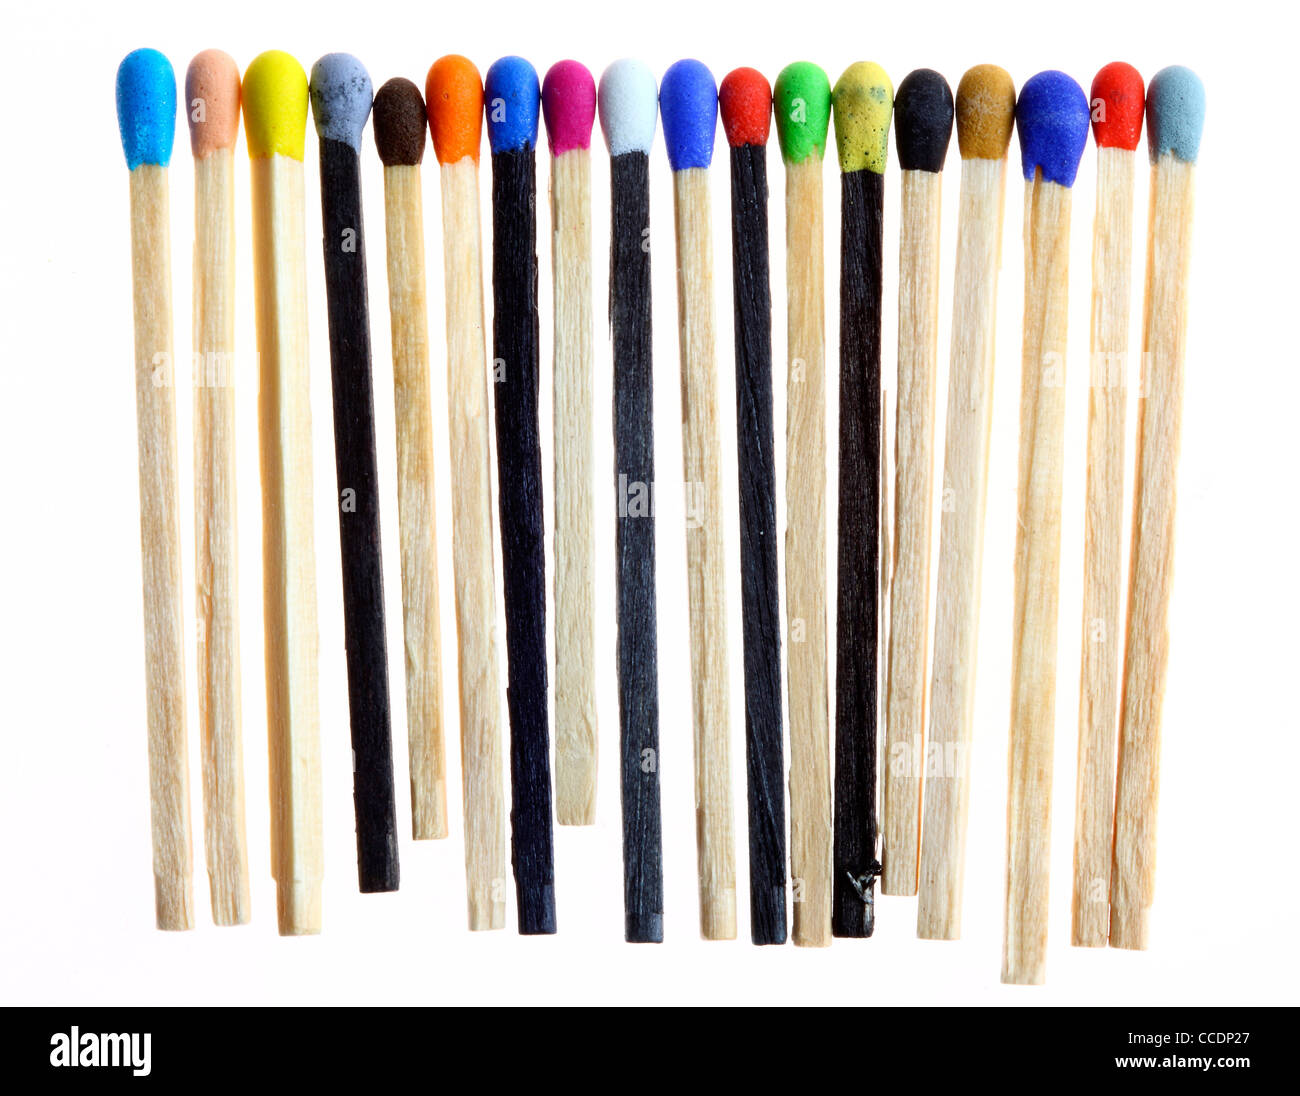 Matches, different colors and different sizes, forms, designs. Stock Photo